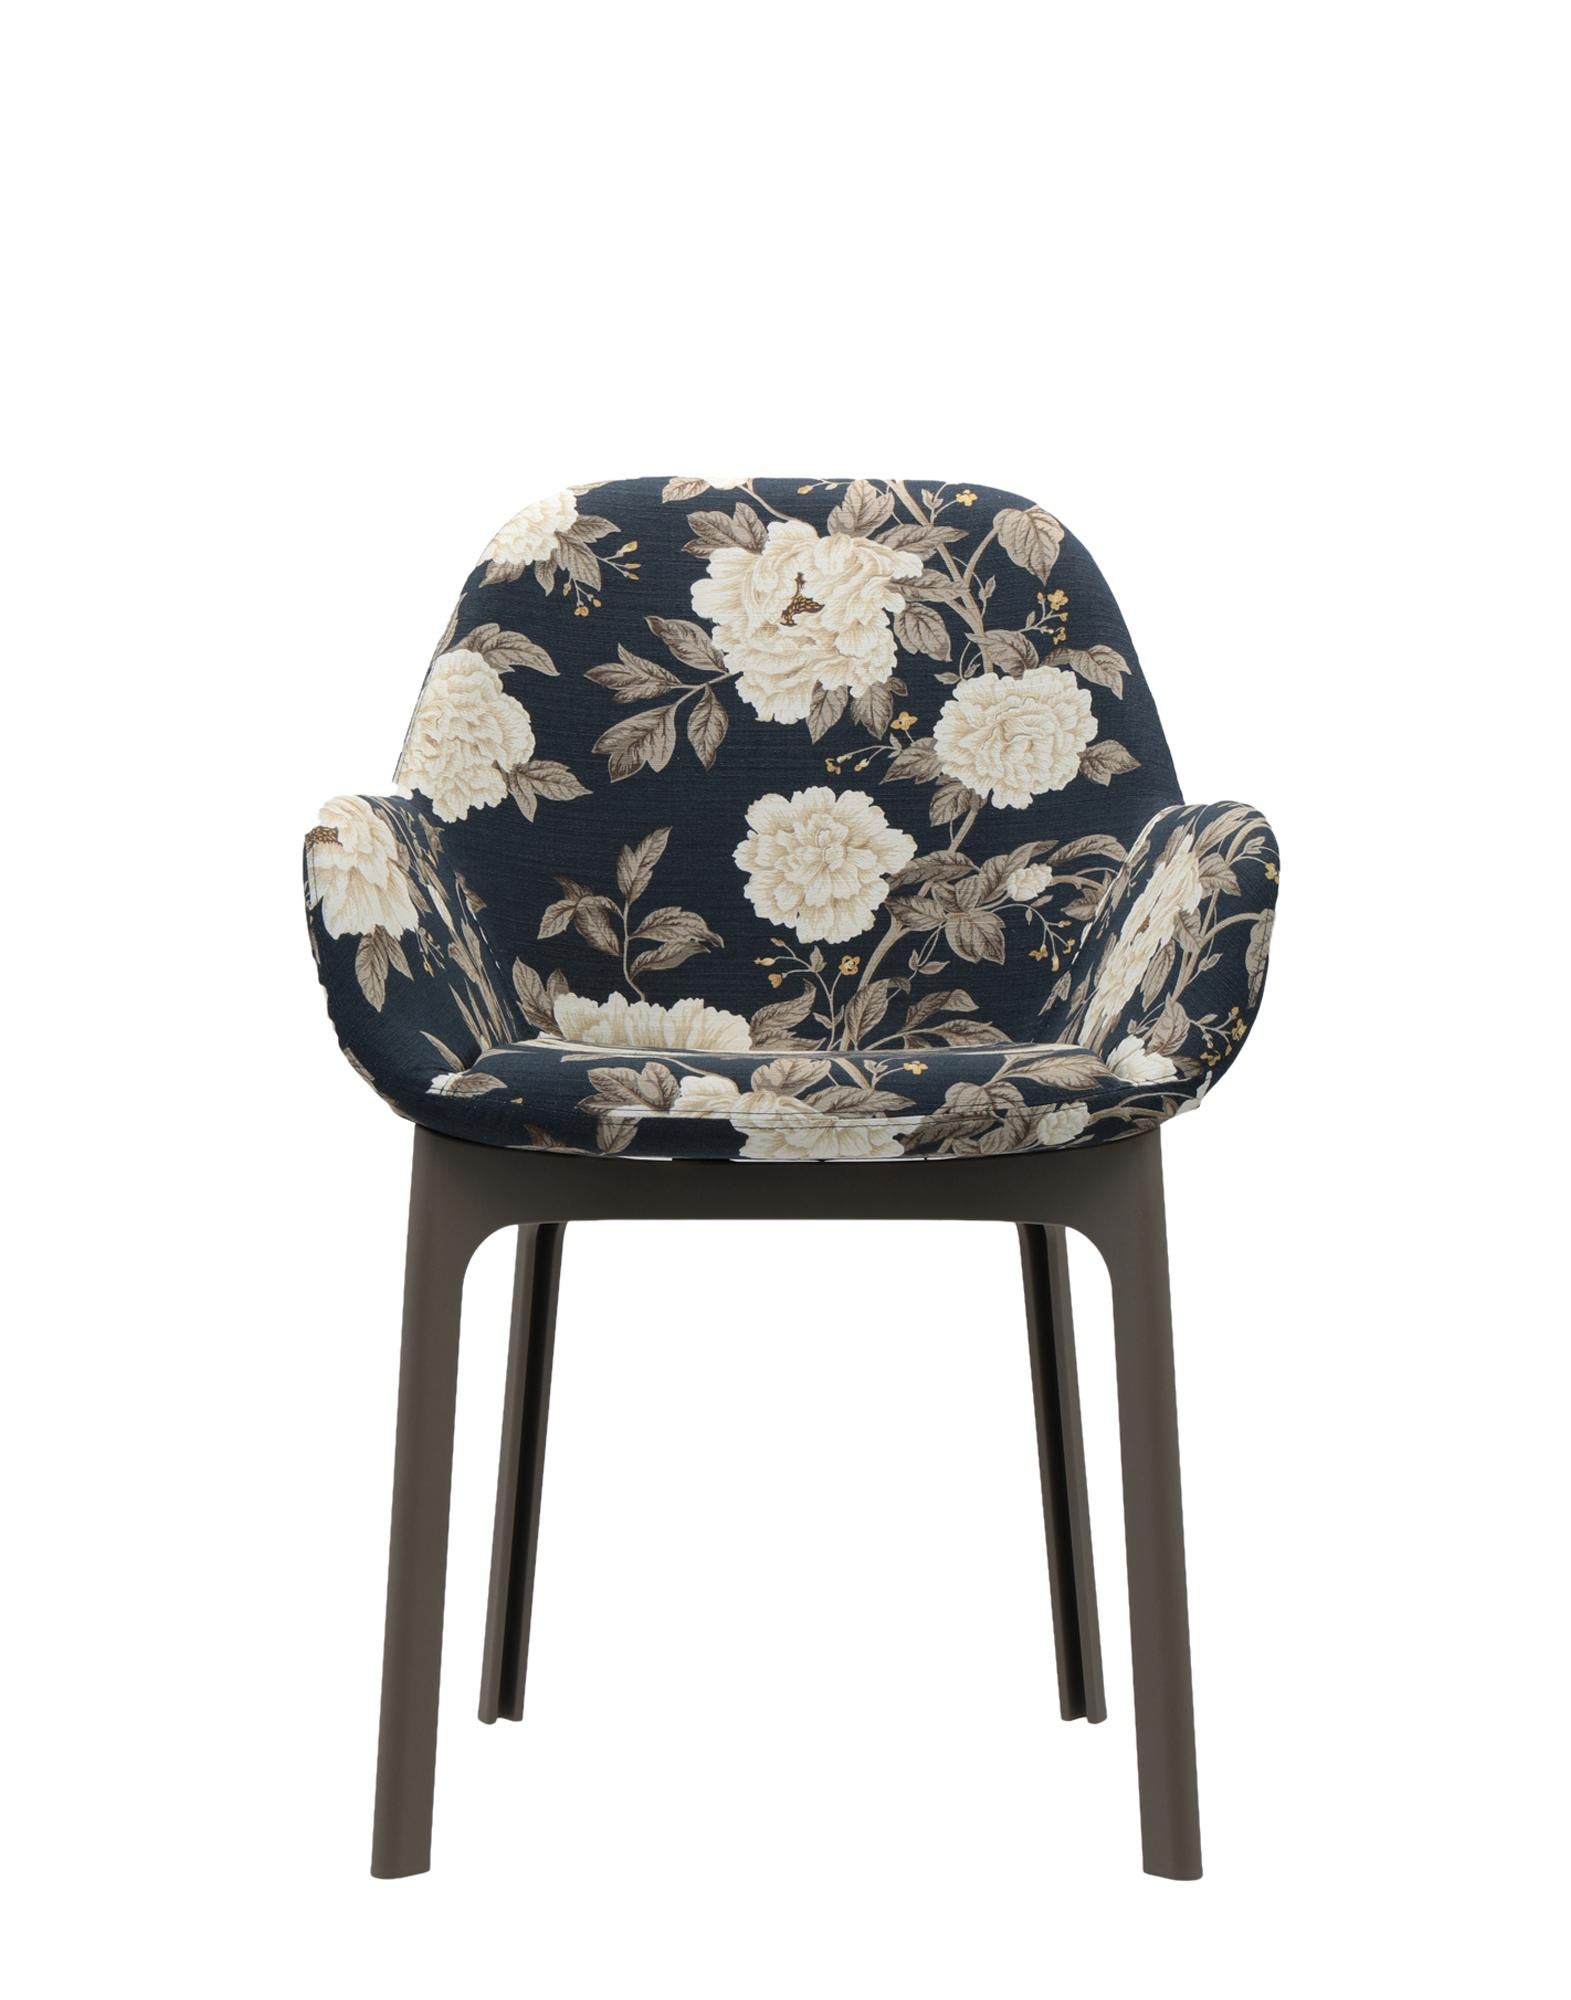 Kartell Clap Chair by Patricia Urquiola in Peony Pattern For Sale 2